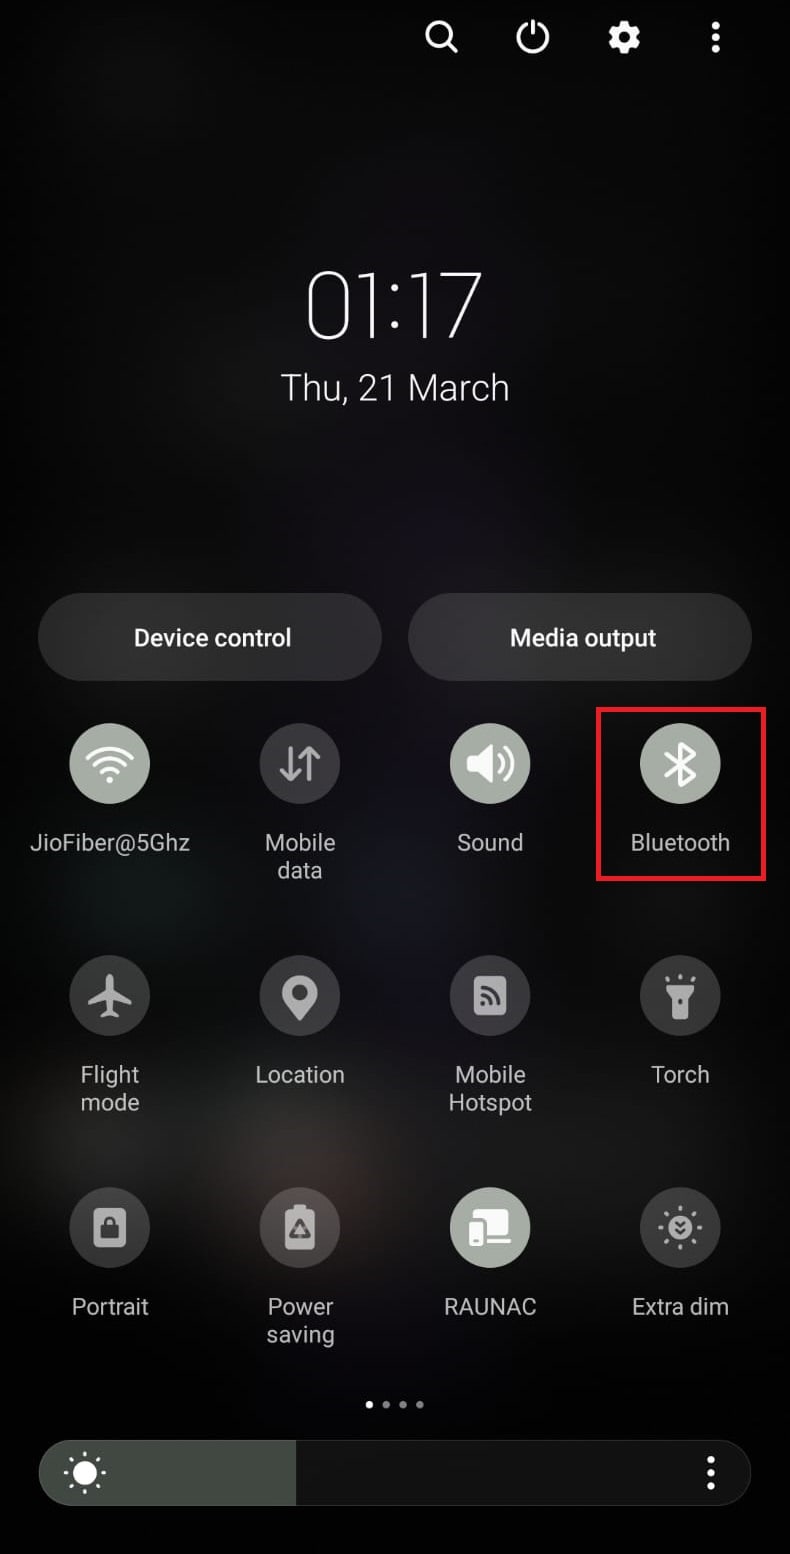 Enable Bluetooth on your smartphone